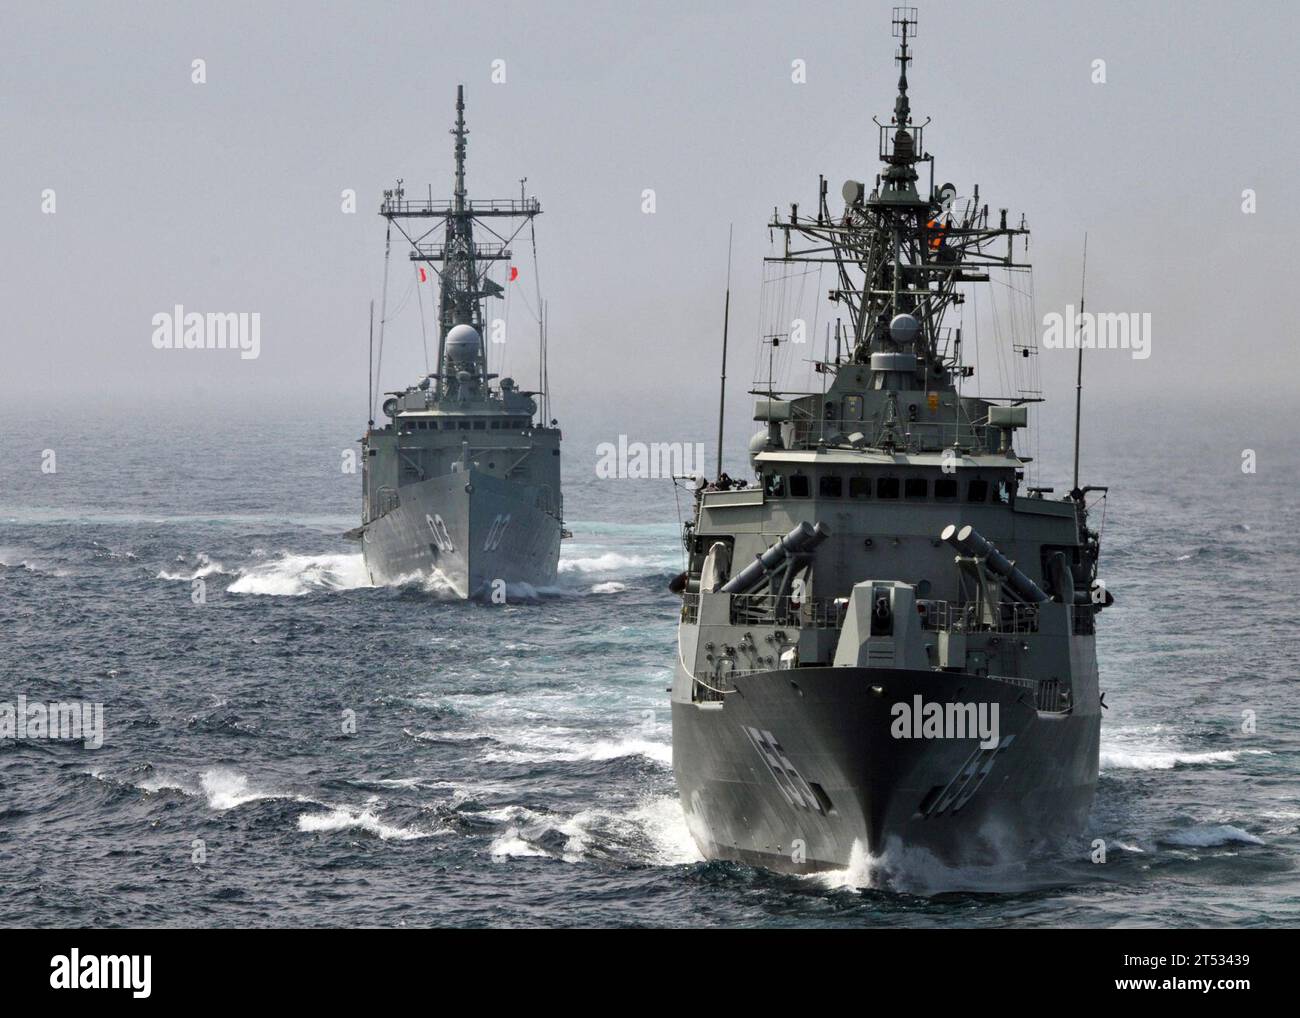 0907174236E-473 ATLANTIC OCEAN (July 17, 2009) The Royal Australian Navy Adelaide-class guided missile frigate HMAS Sydney (FFG 03) and the Anzac-class frigate HMAS Ballarat (FFG 155) perform formation maneuvering with the guided missile destroyer USS Mahan (DDG 72). Mahan is underway conducting exercises with the Royal Australian Navy during operation Northern Trident 2009. Stock Photo